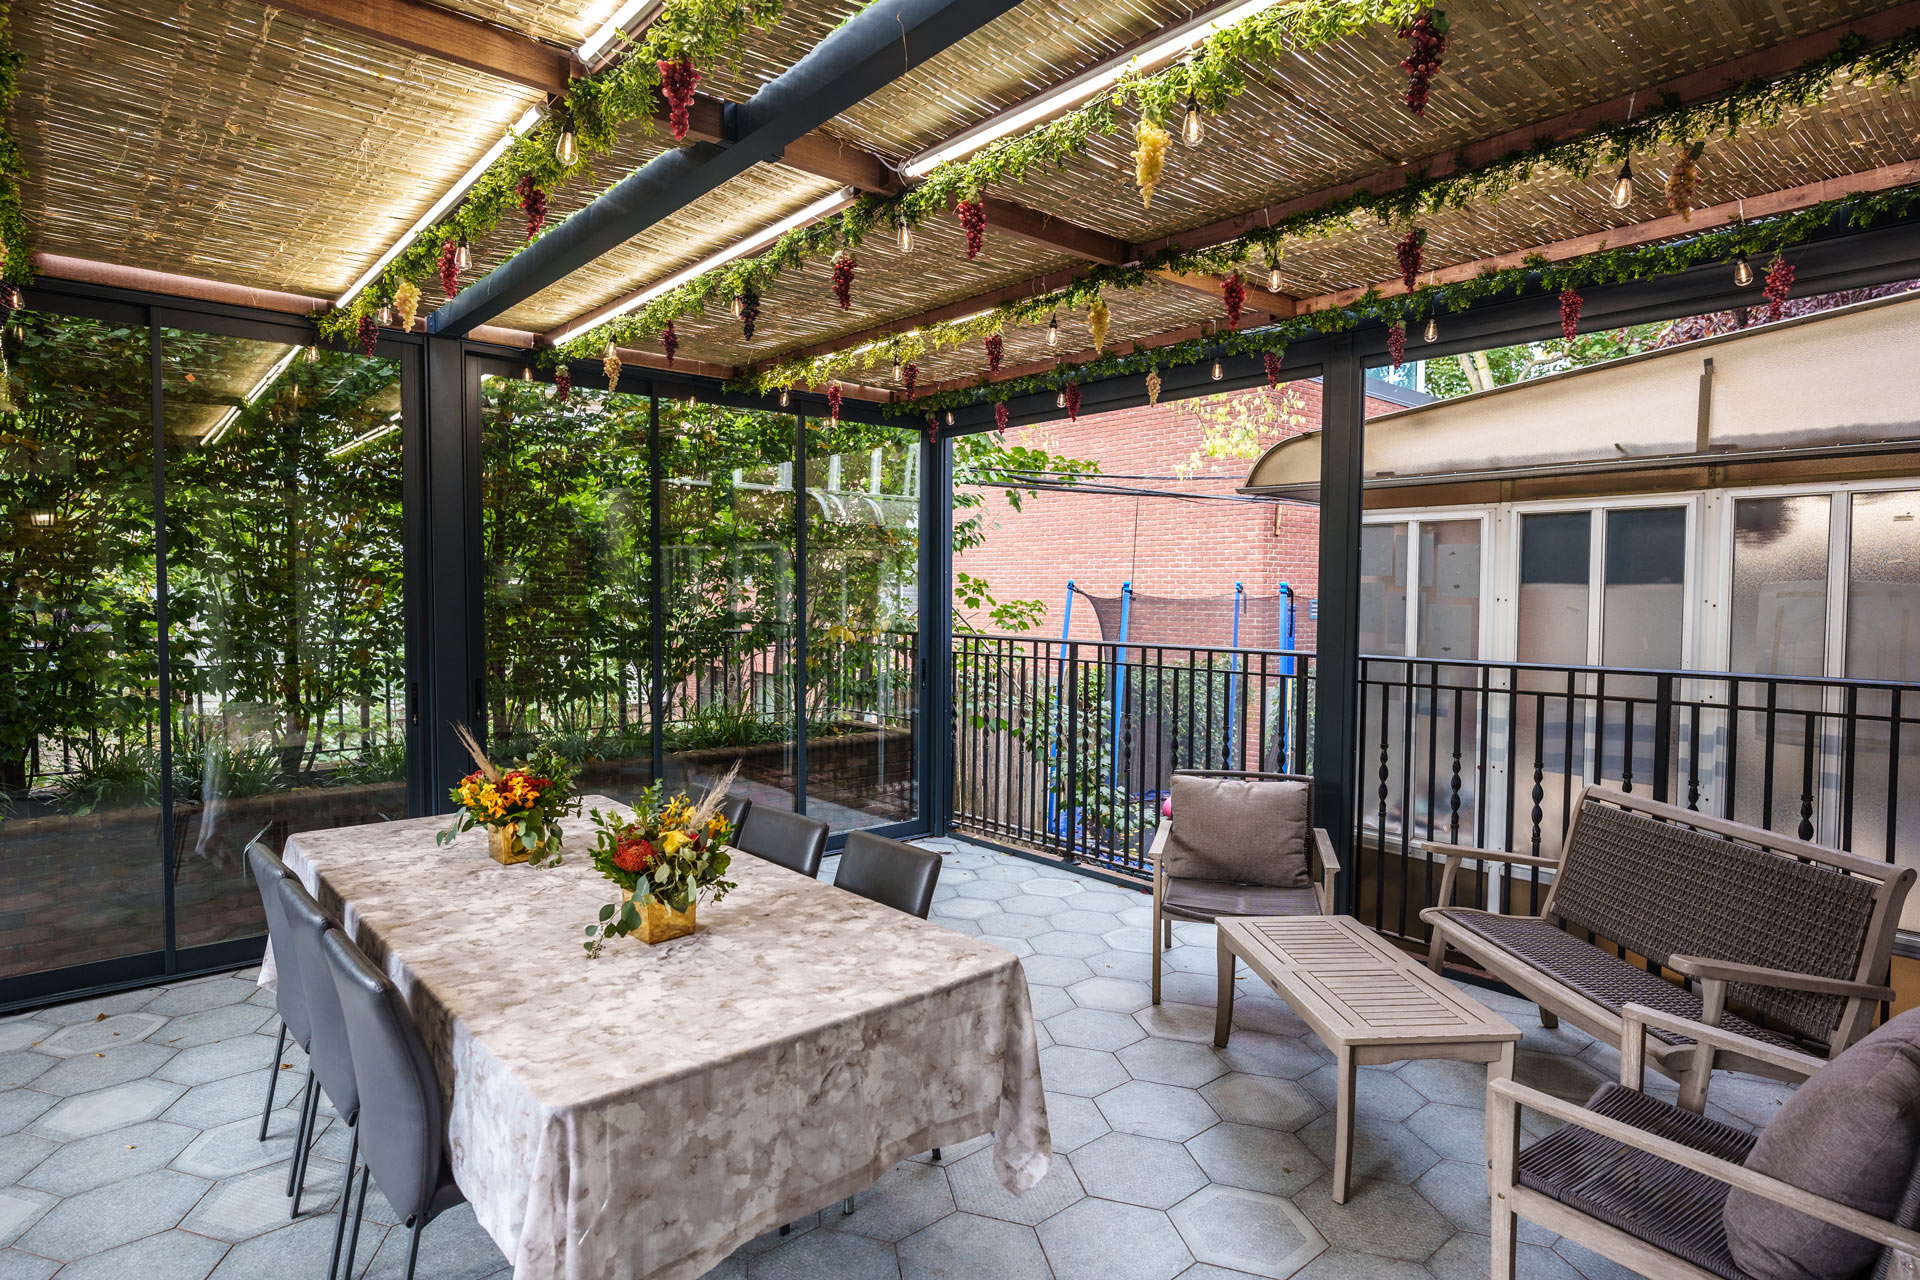 Featured image: Retractable pergola sukkah patio in the backyard of the house - Read full post: The History and Significance of Sukkahs and How Your Pergola Can Play a Role